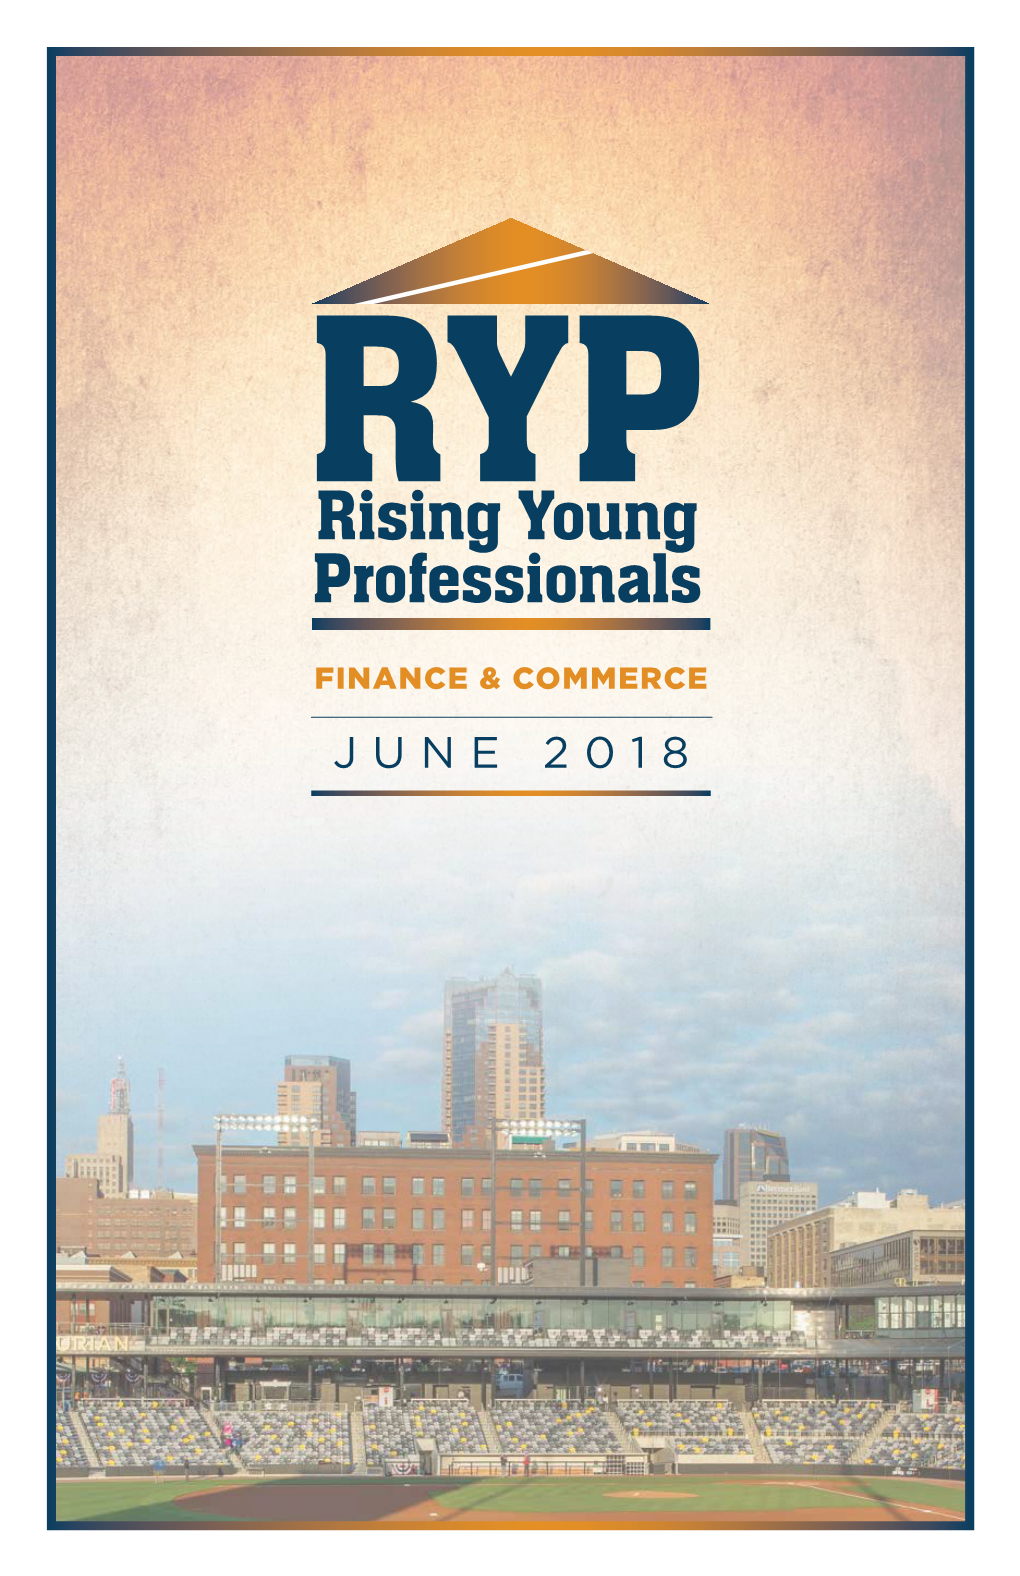 Rising Young Professionals Honoree Profiles the Future of Our Region Is in Good Hands, Judging from the Stellar People Selected Becky Alexander